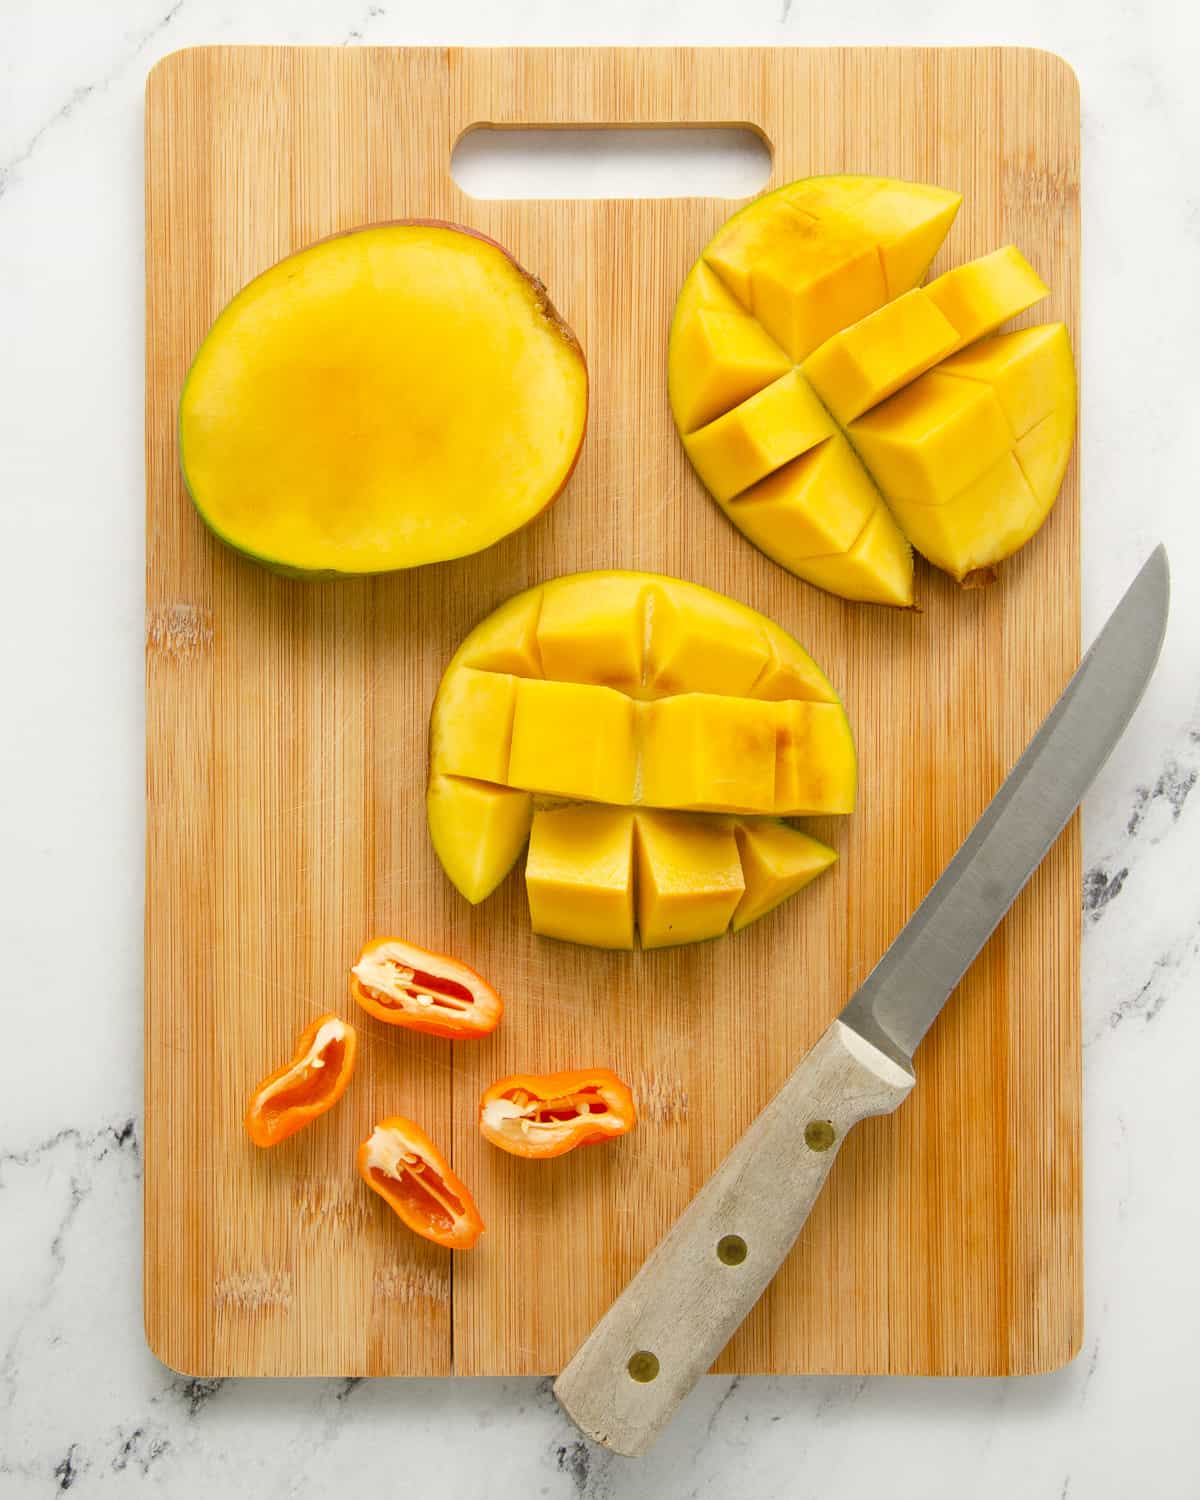 Two halves of a mango cubed with the middle seed to the side while two habaneros are sliced in half lengthwise.